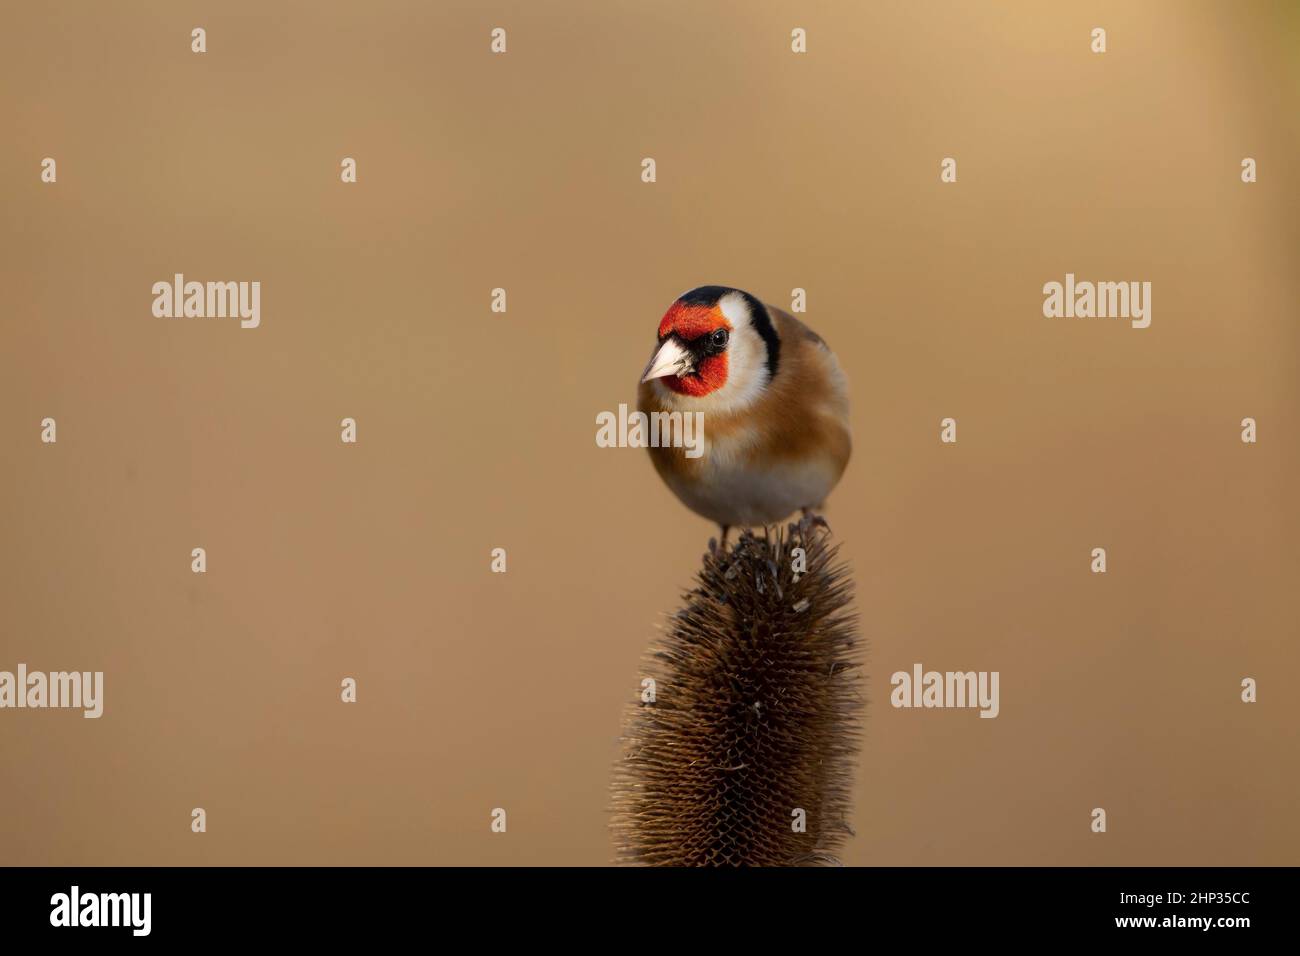 Solitary Goldfinch Carduelis carduelis  on the head of a teasel against a neutral diffuse background showing its red face black crown and white cheeks Stock Photo